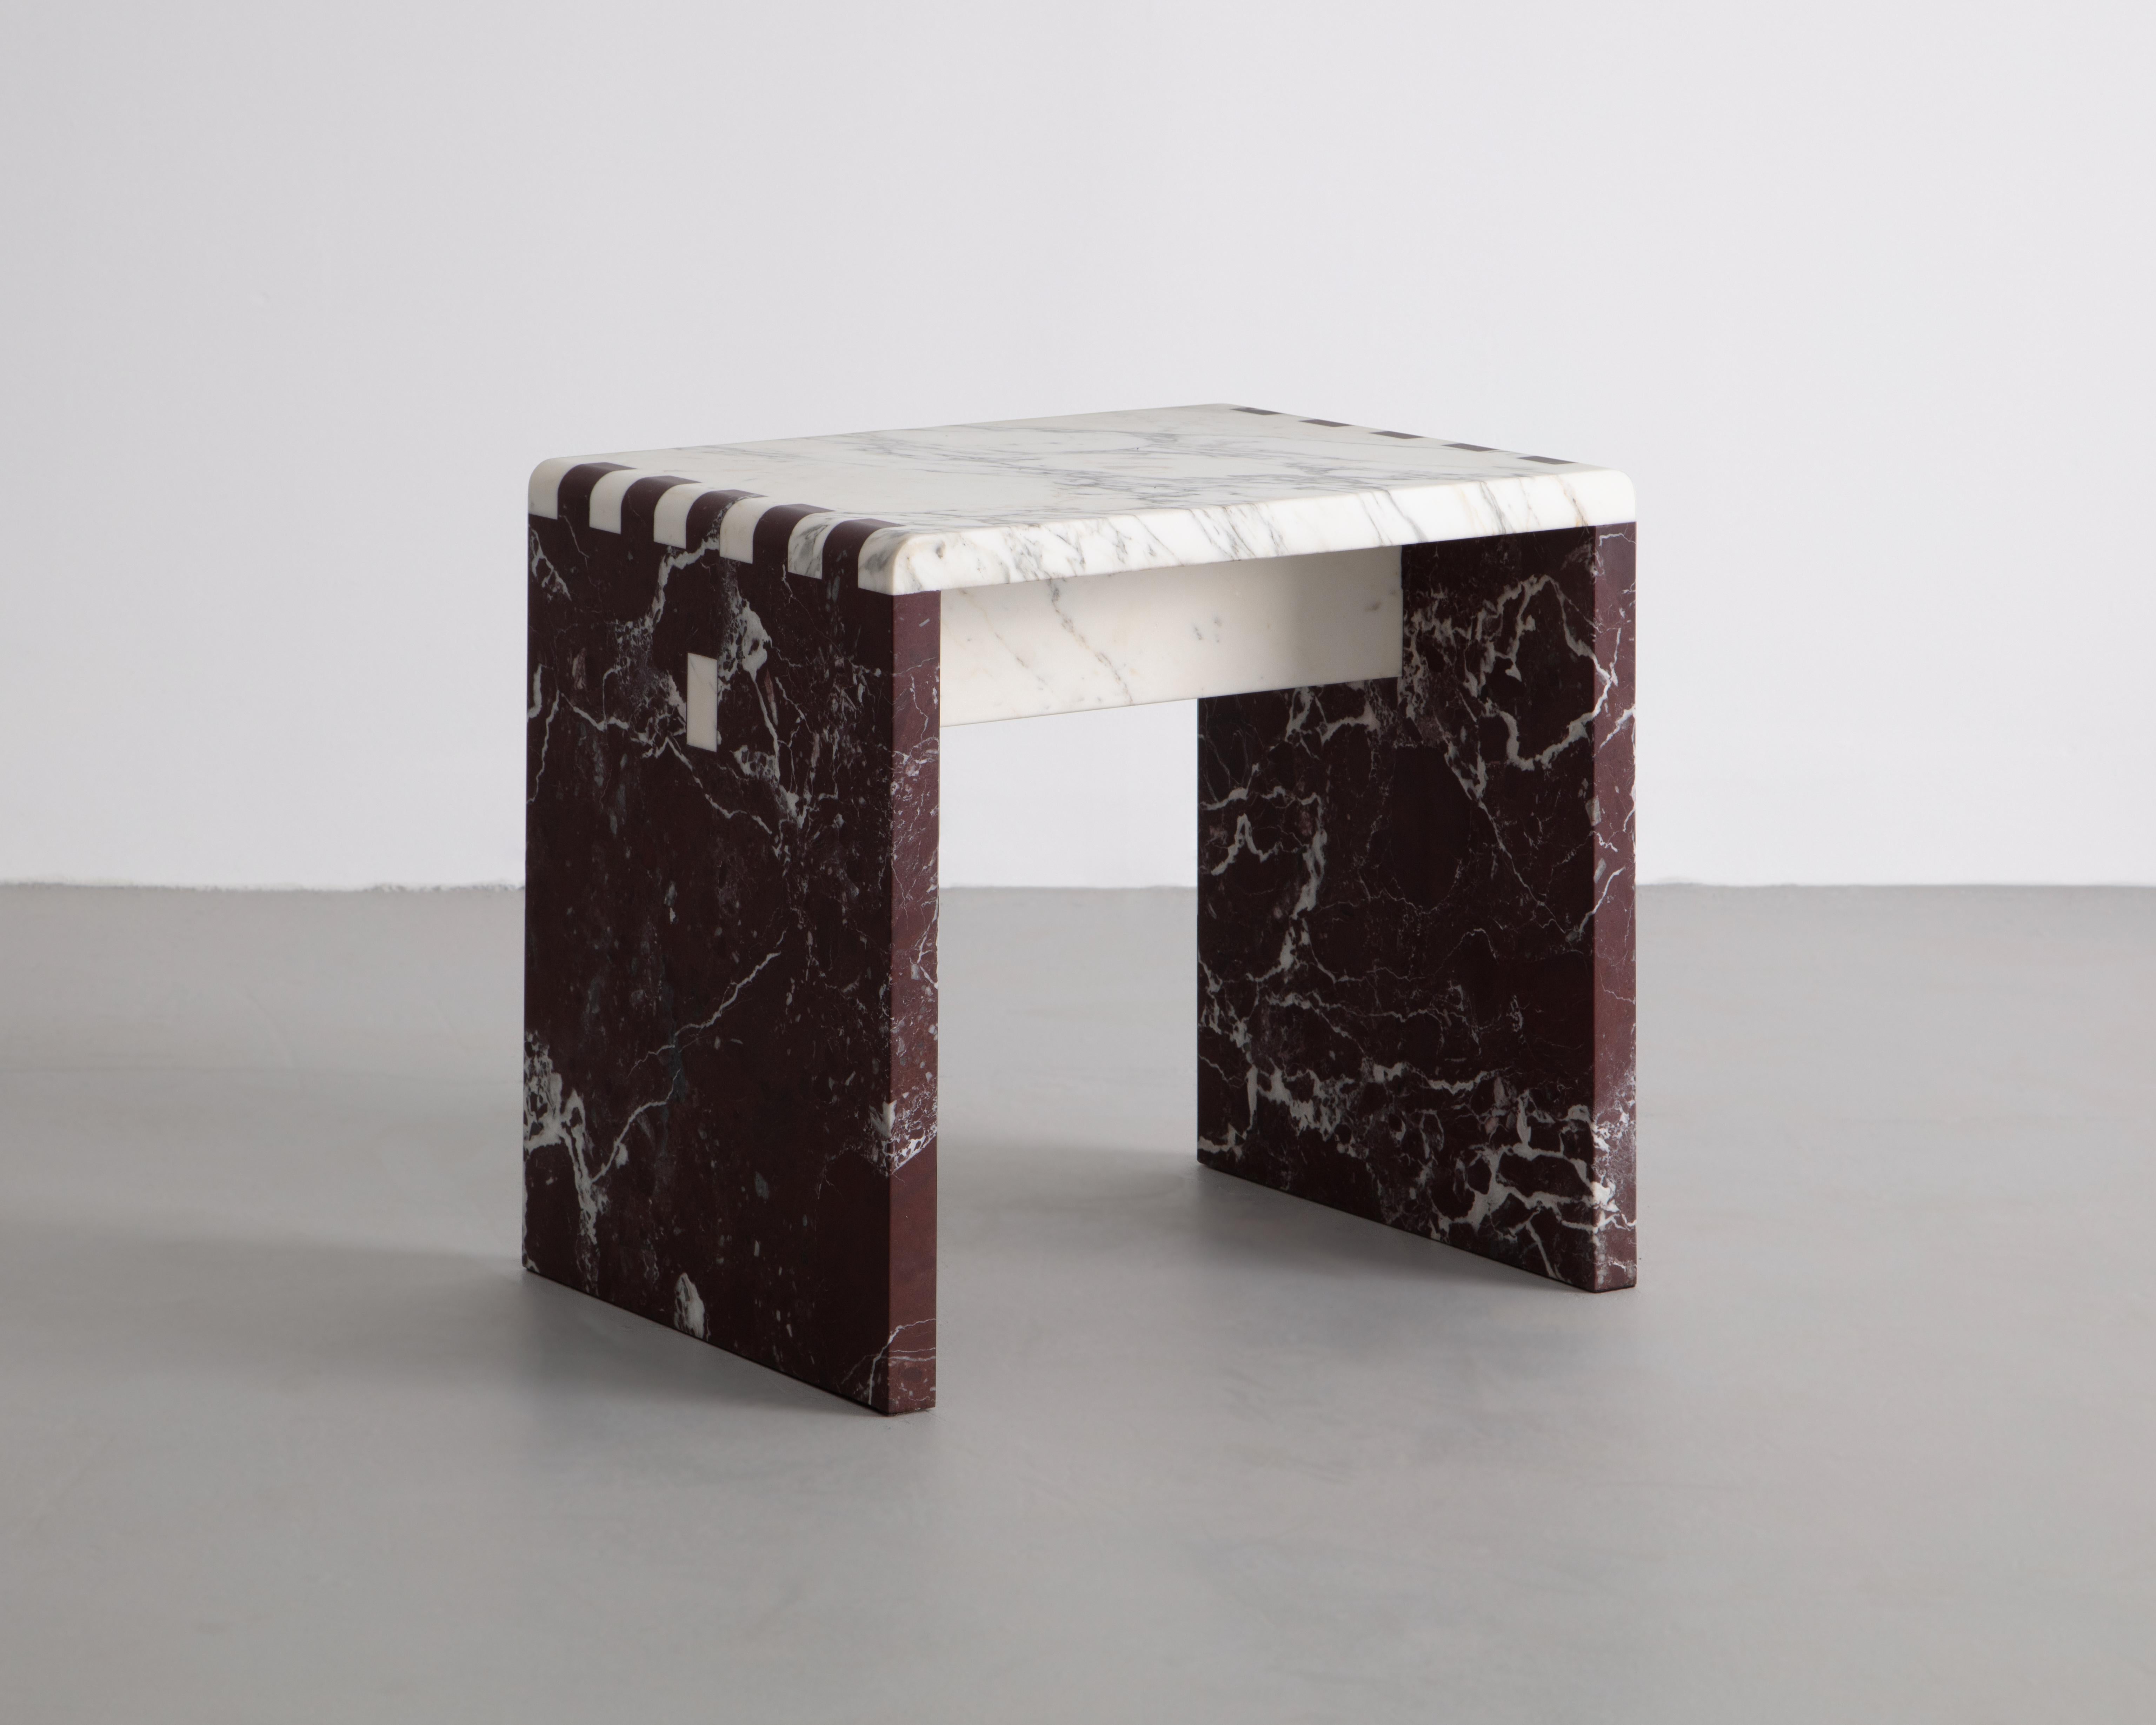 Inspired by traditional Japanese wood joinery, this minimalist stool/side table is a material study of stone. Shown in Calacatta Gold & Rosso Levanto Marble. 

Sure to make a statement for any environment.
 